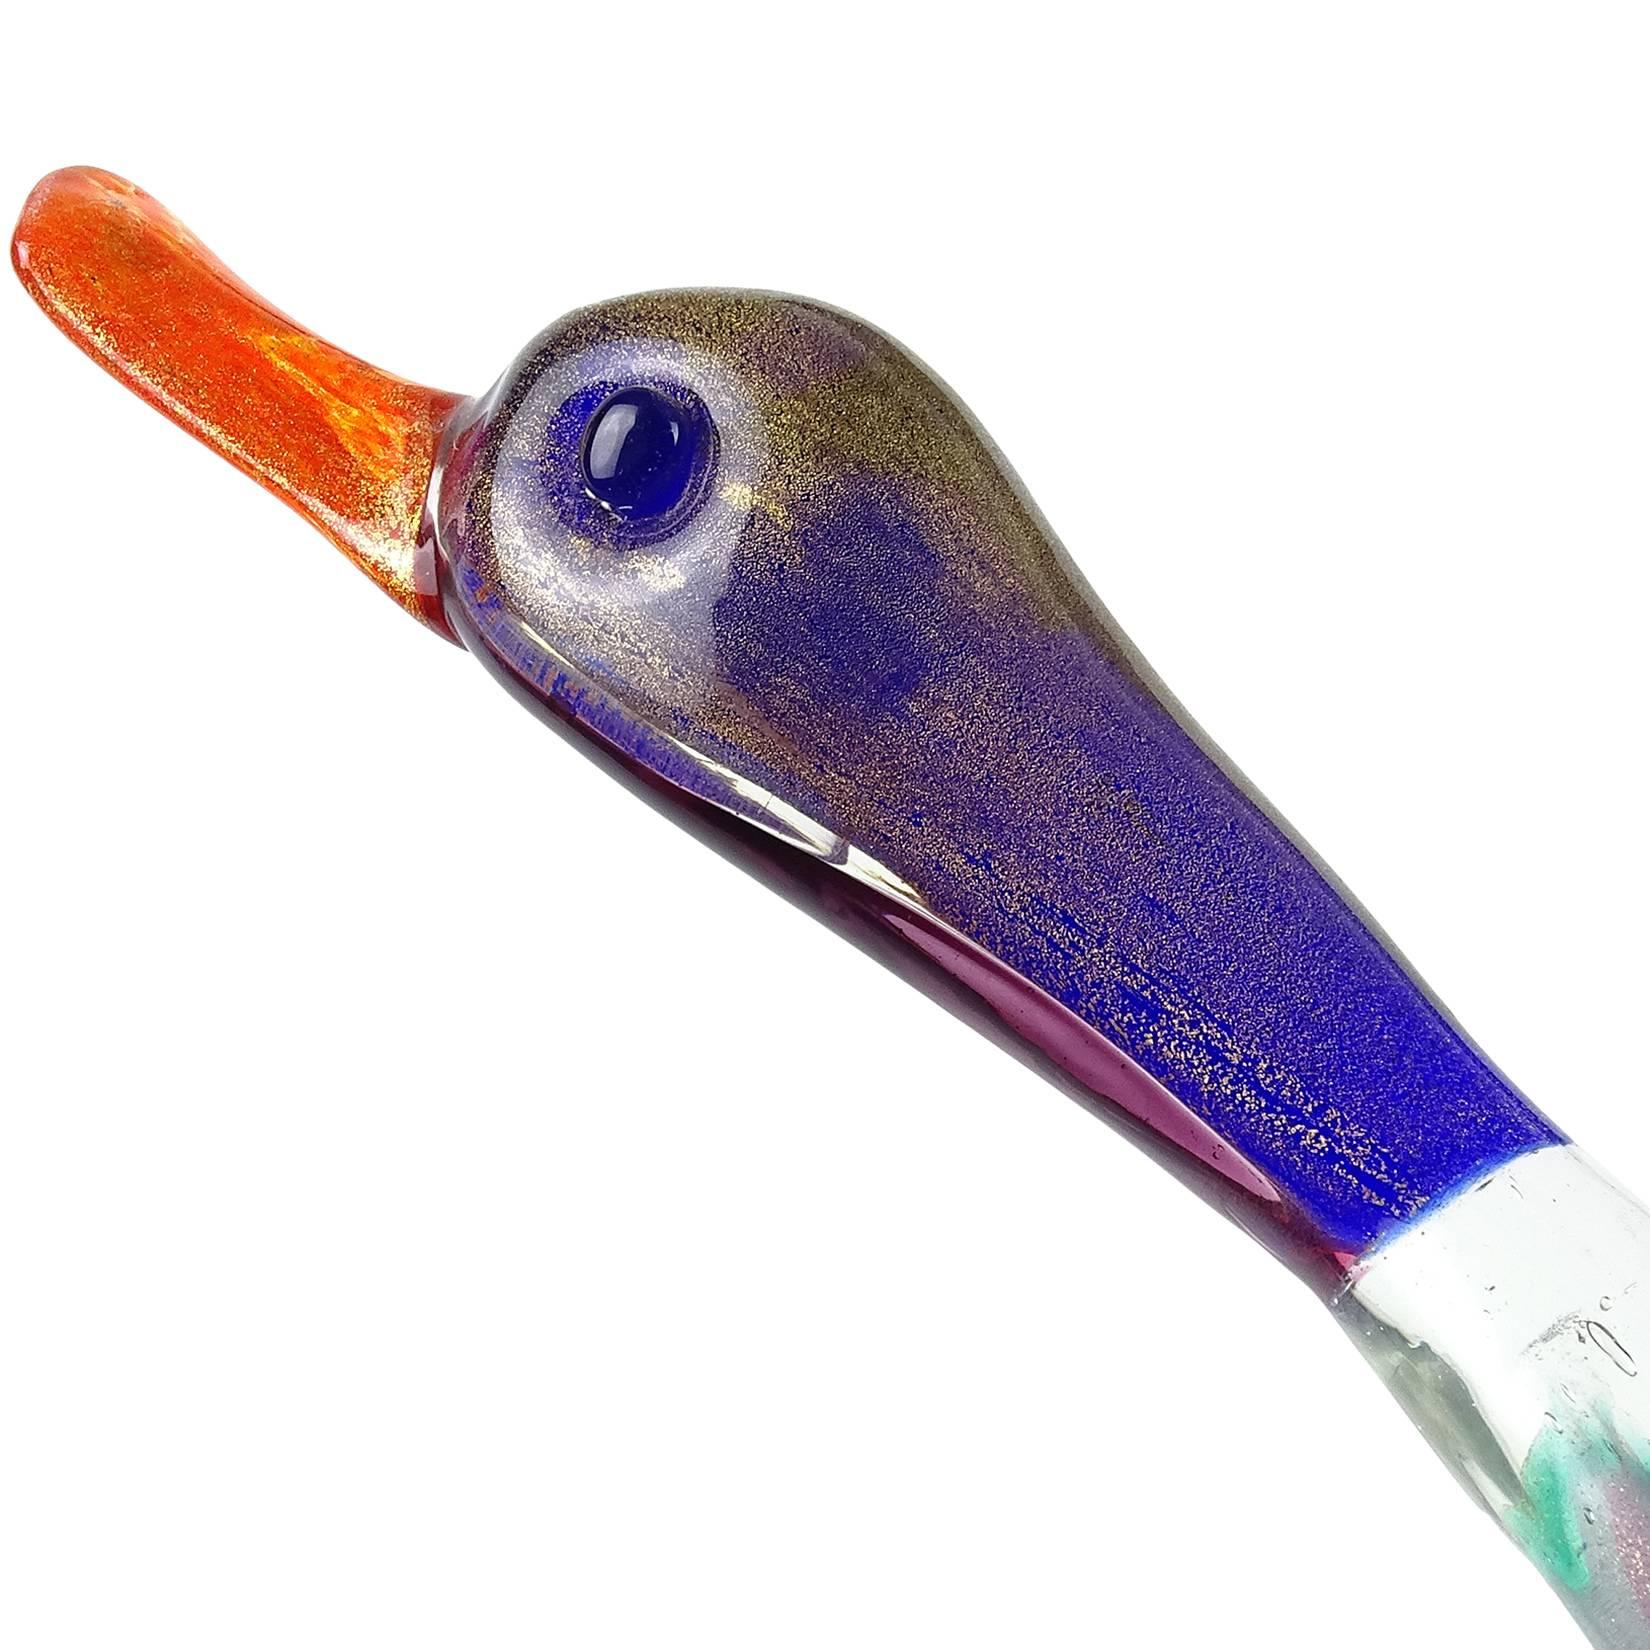 Beautiful, large and rare Murano hand blown Sommerso rainbow colors, controlled bubbles and gold flecks Italian art glass duck / goose shaped centrepiece vase. Attributed to designer Flavio Poli, for Seguso Vetri d’Arte, circa 1940s. The bird is